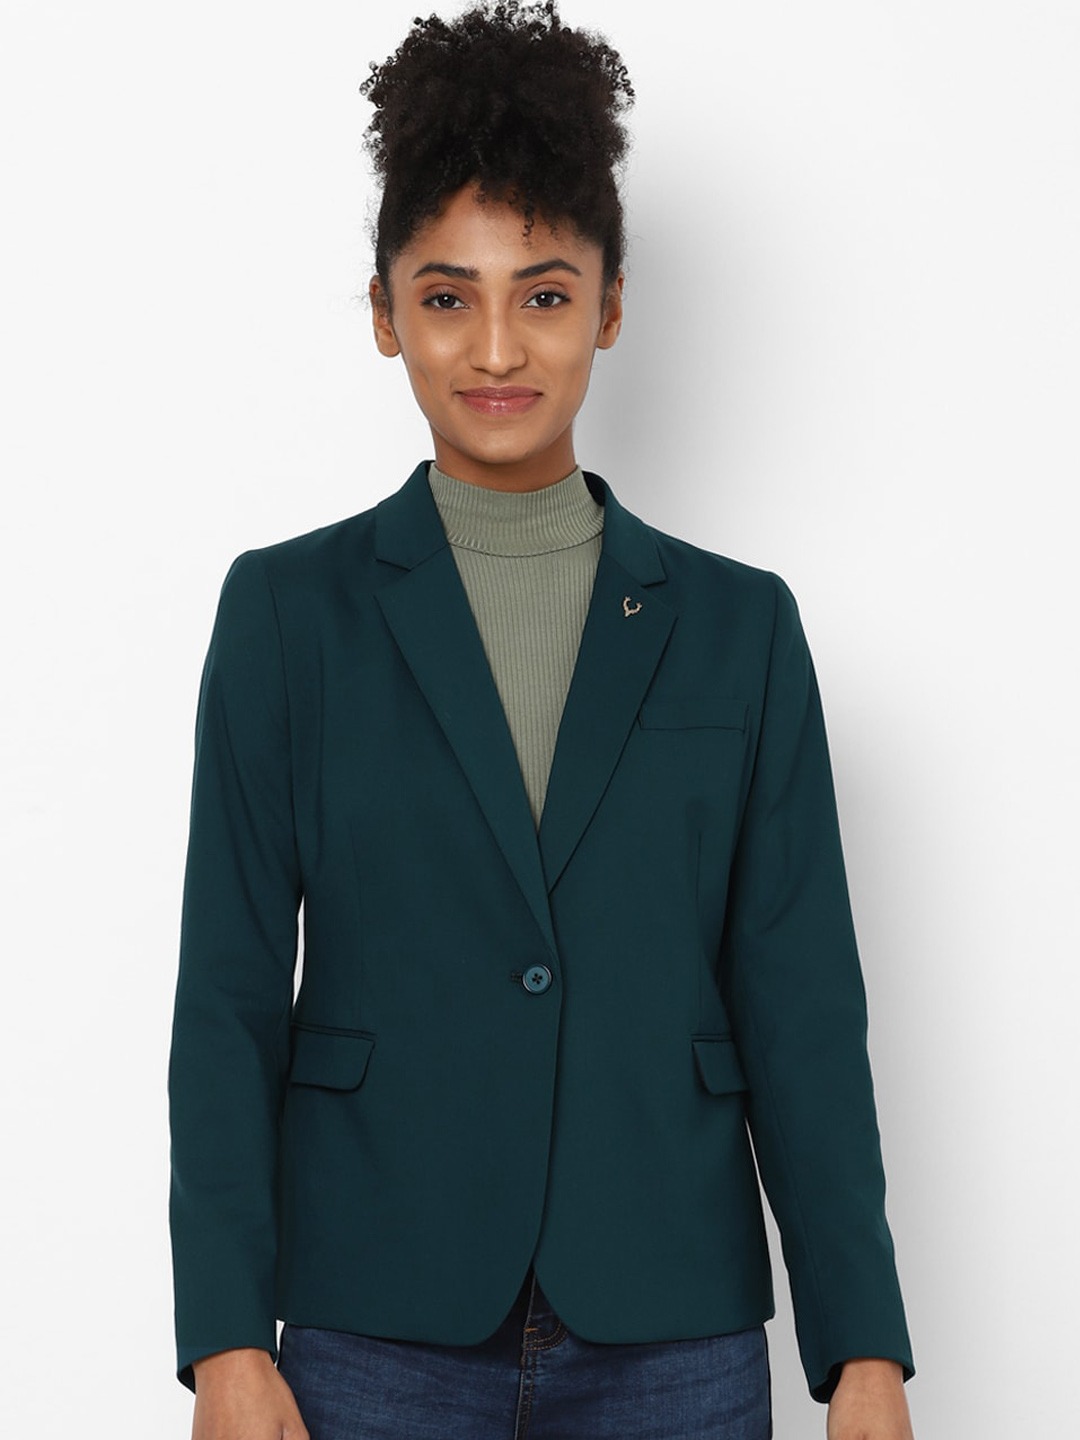 Clothing Blazers | Allen Solly Woman Green Solid Single-Breasted Casual Blazer - GD77205